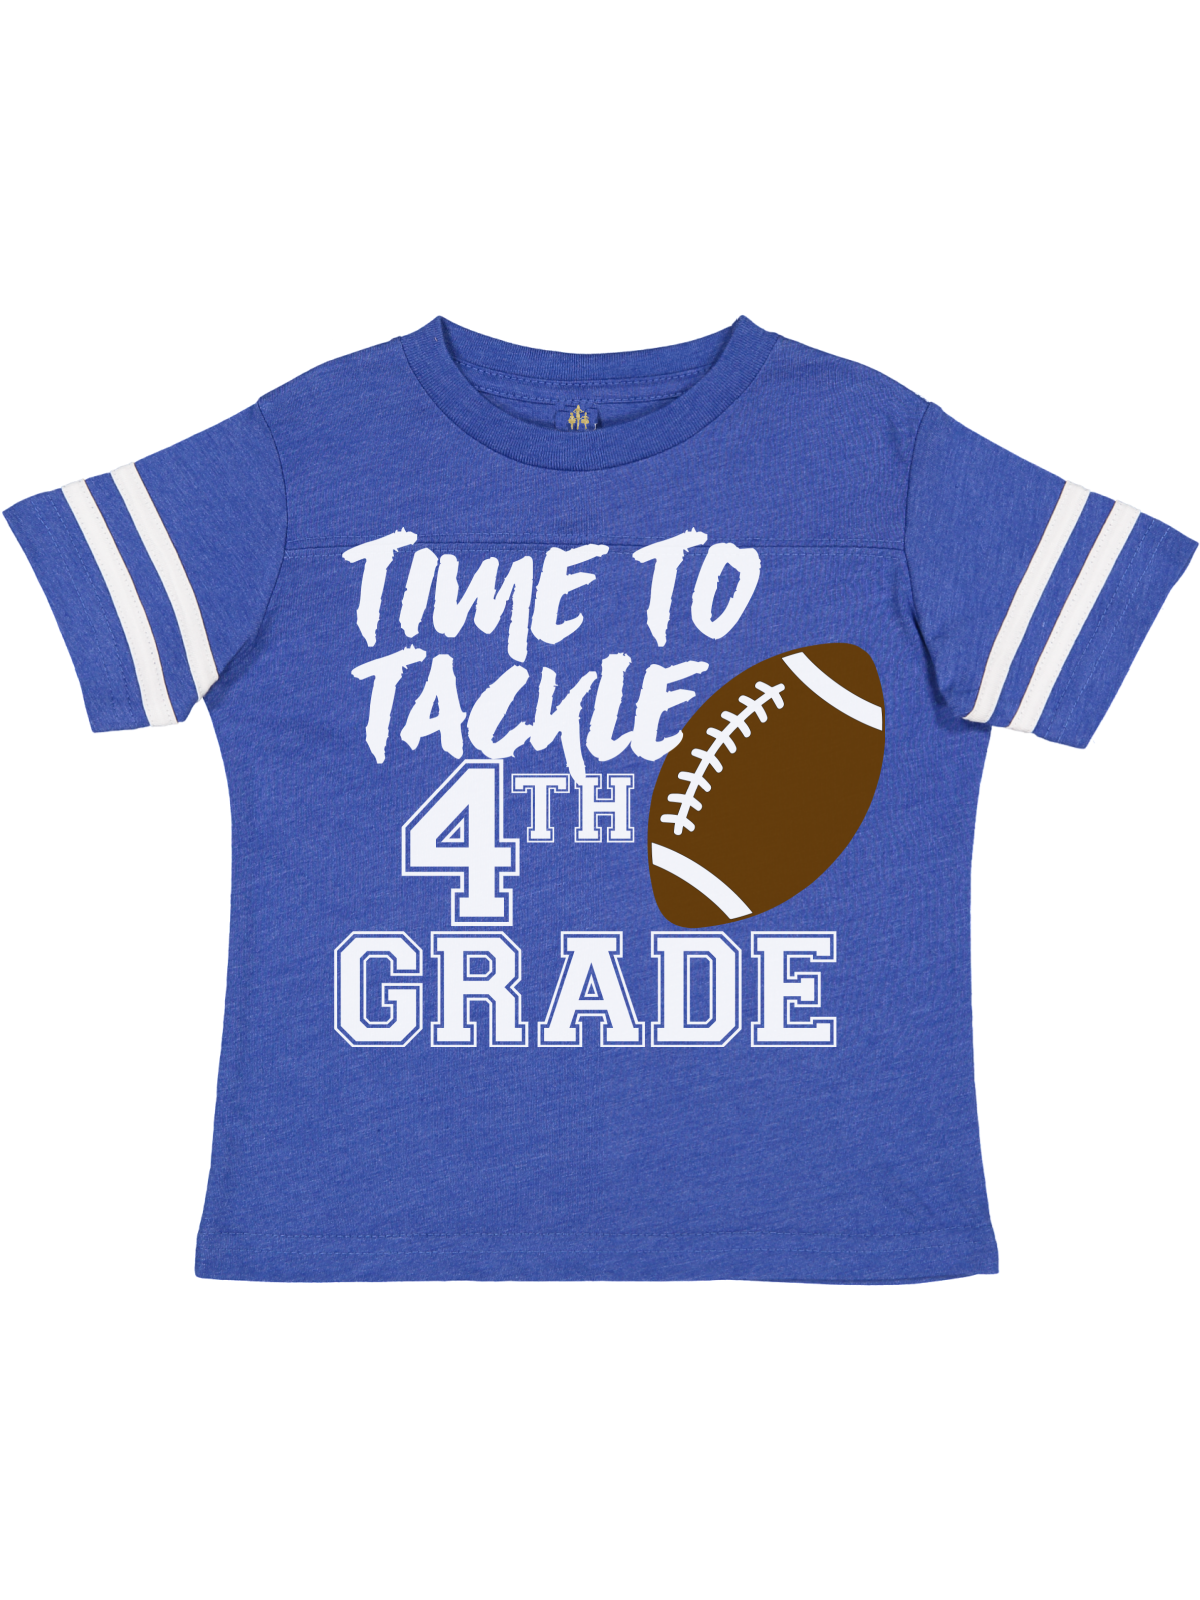 Time to Tackle 4th Grade Boys Blue and White Football Shirt